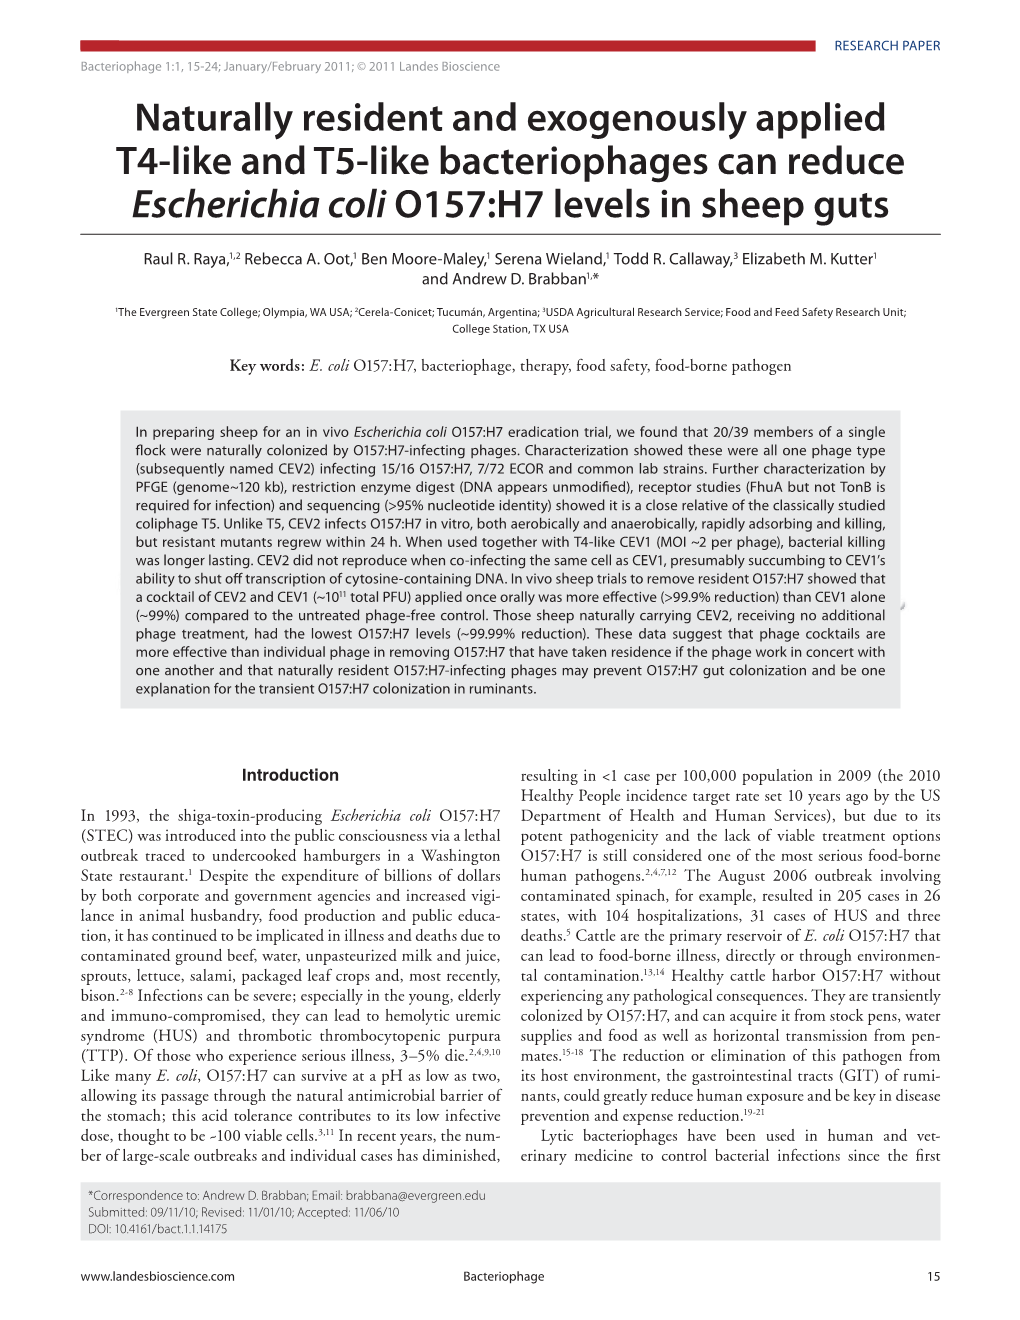 Naturally Resident and Exogenously Applied T4-Like and T5-Like Bacteriophages Can Reduce Escherichia Coli O157:H7 Levels in Sheep Guts